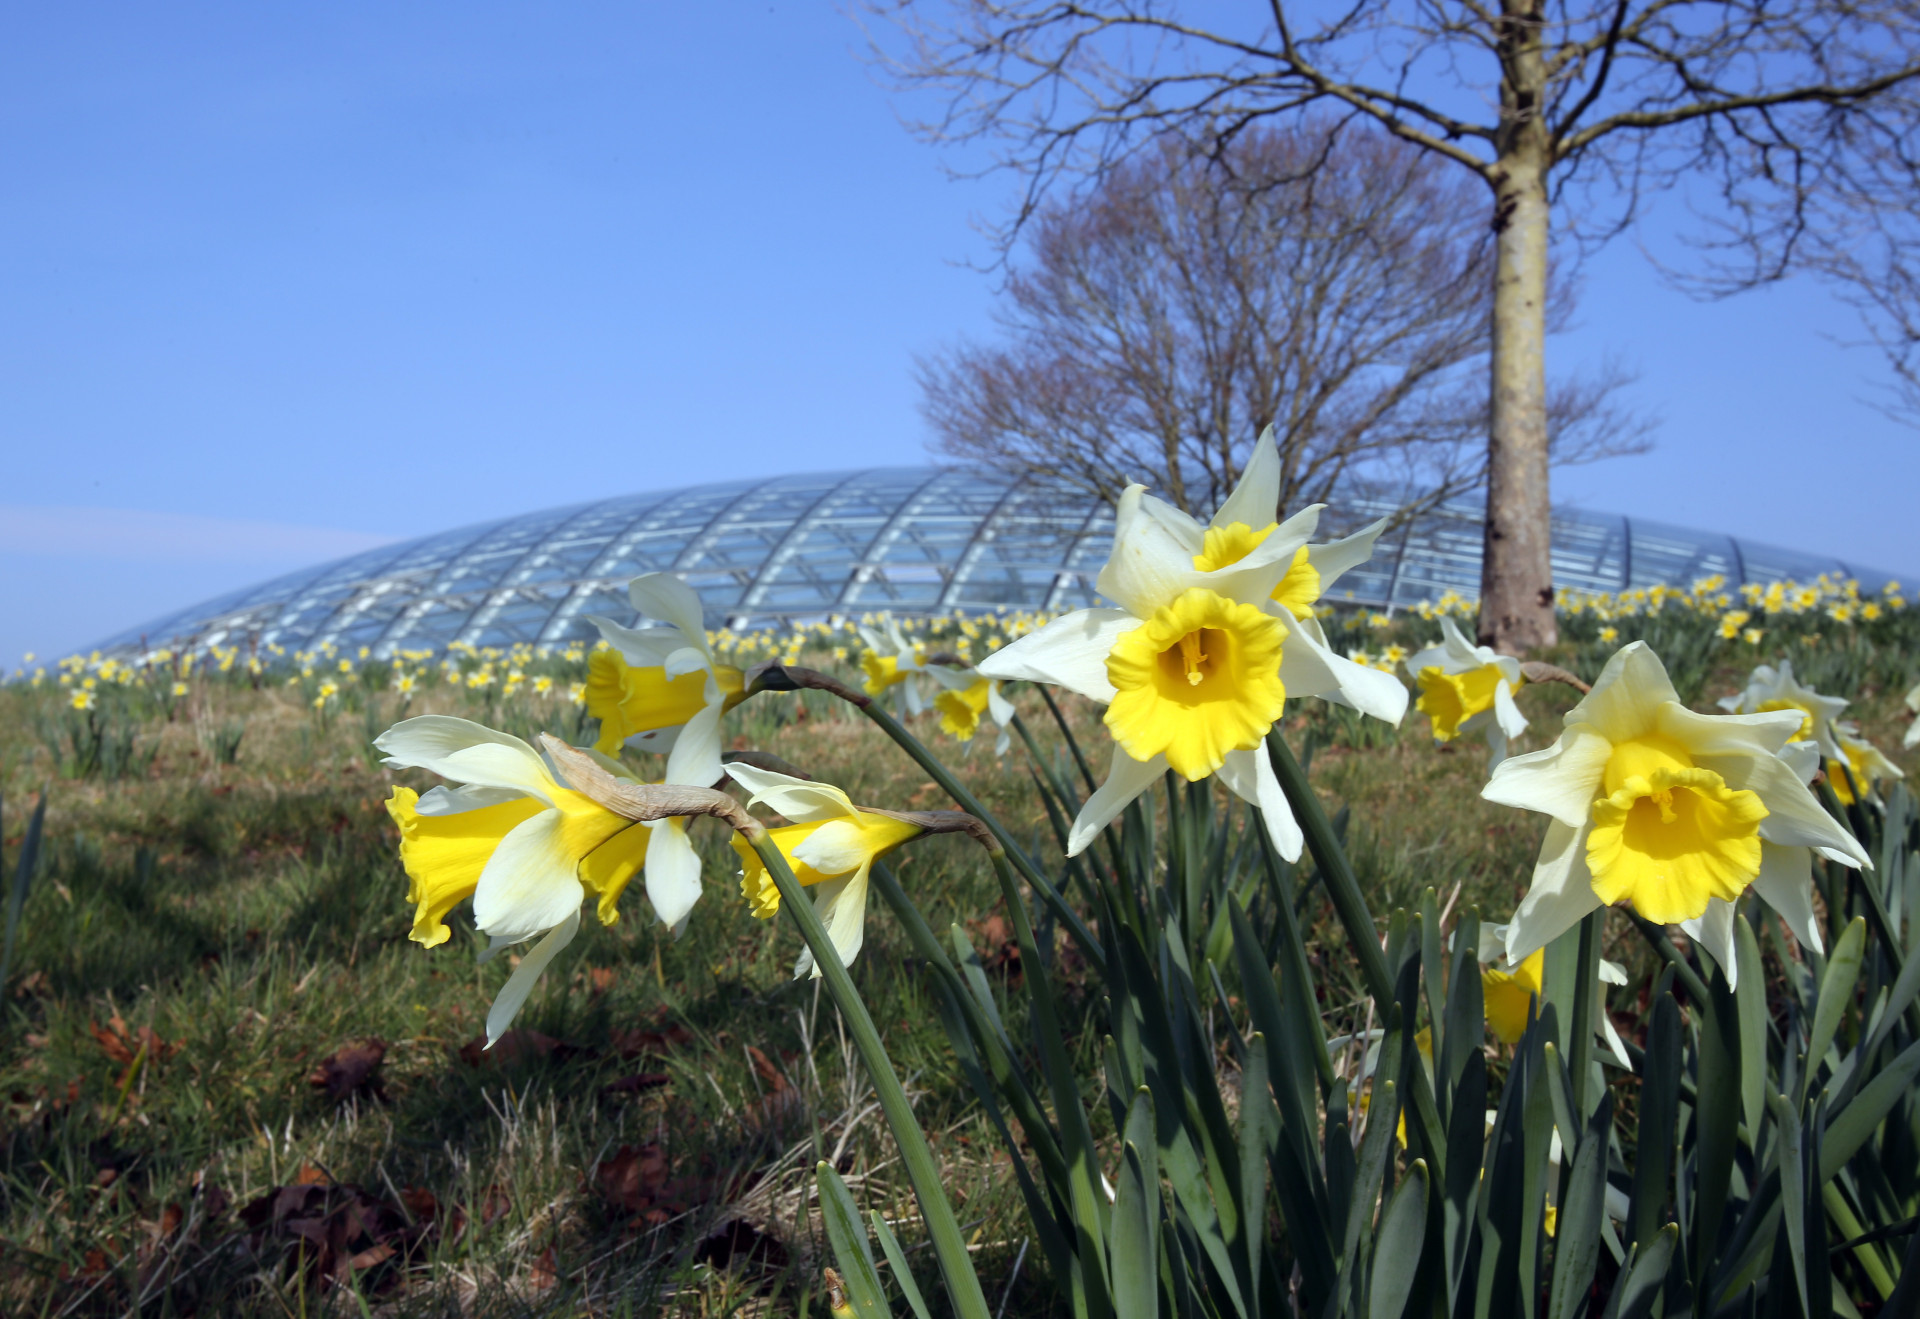 Daffodils grow in front of the Great Glasshouse at the National Botanic Garden of Wales near Carmarthen, Wales. <p>You may also like:<a href="https://www.starsinsider.com/n/434516?utm_source=msn.com&utm_medium=display&utm_campaign=referral_description&utm_content=344596v2en-en"> Vitamin D: The effects of too much and too little sunlight on human health</a></p>